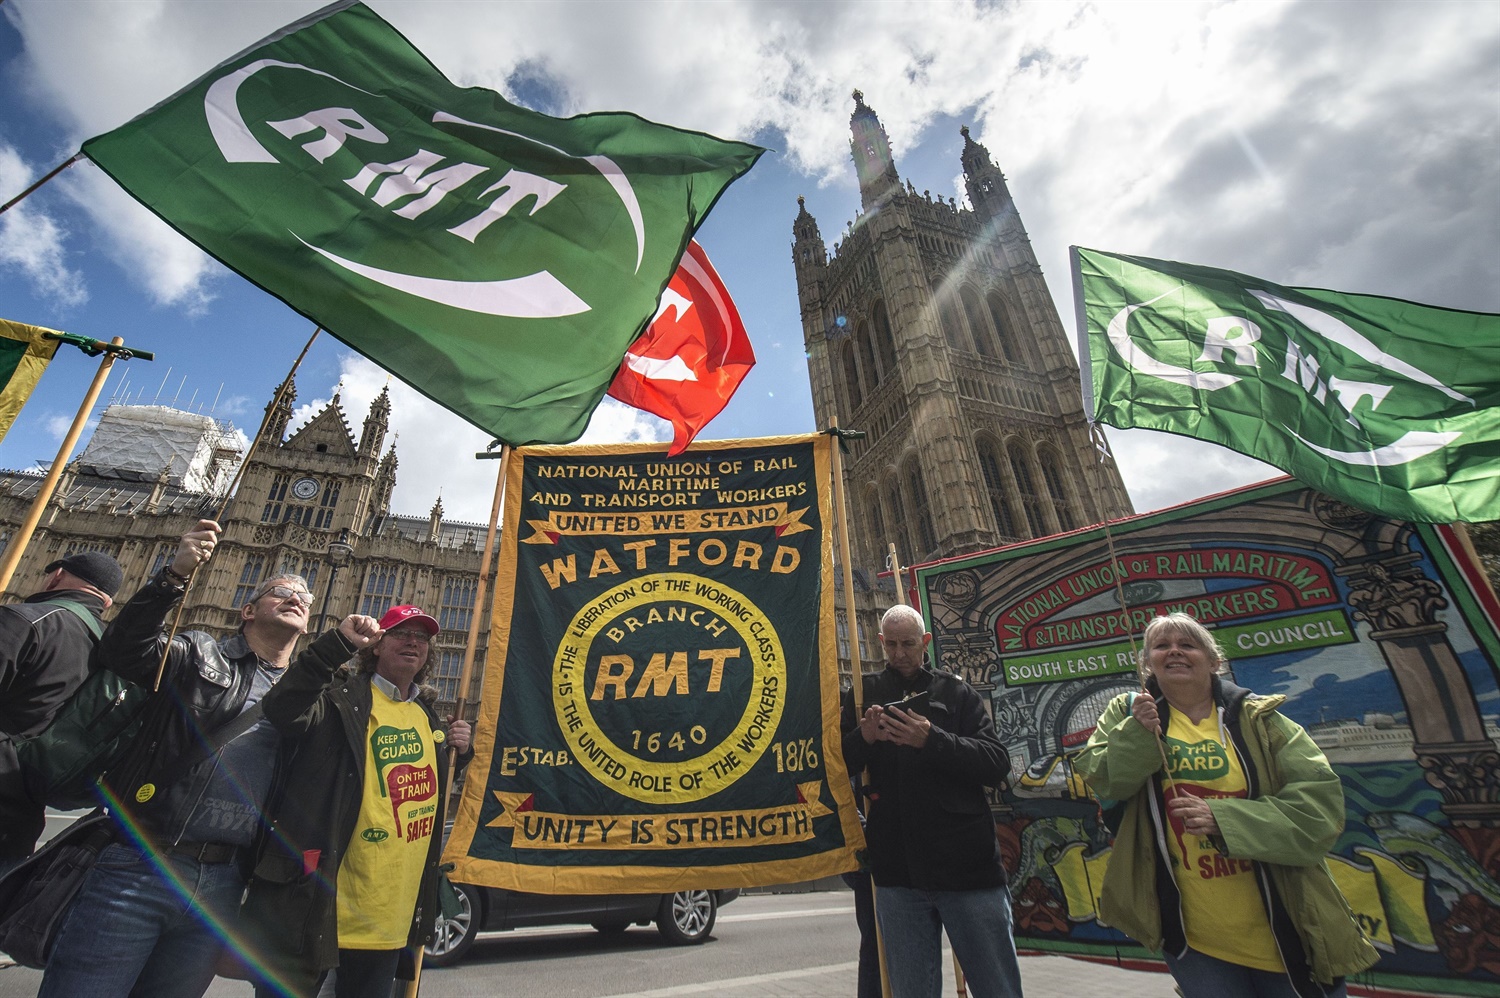 Strike action on GTR has cost taxpayers £22m to date